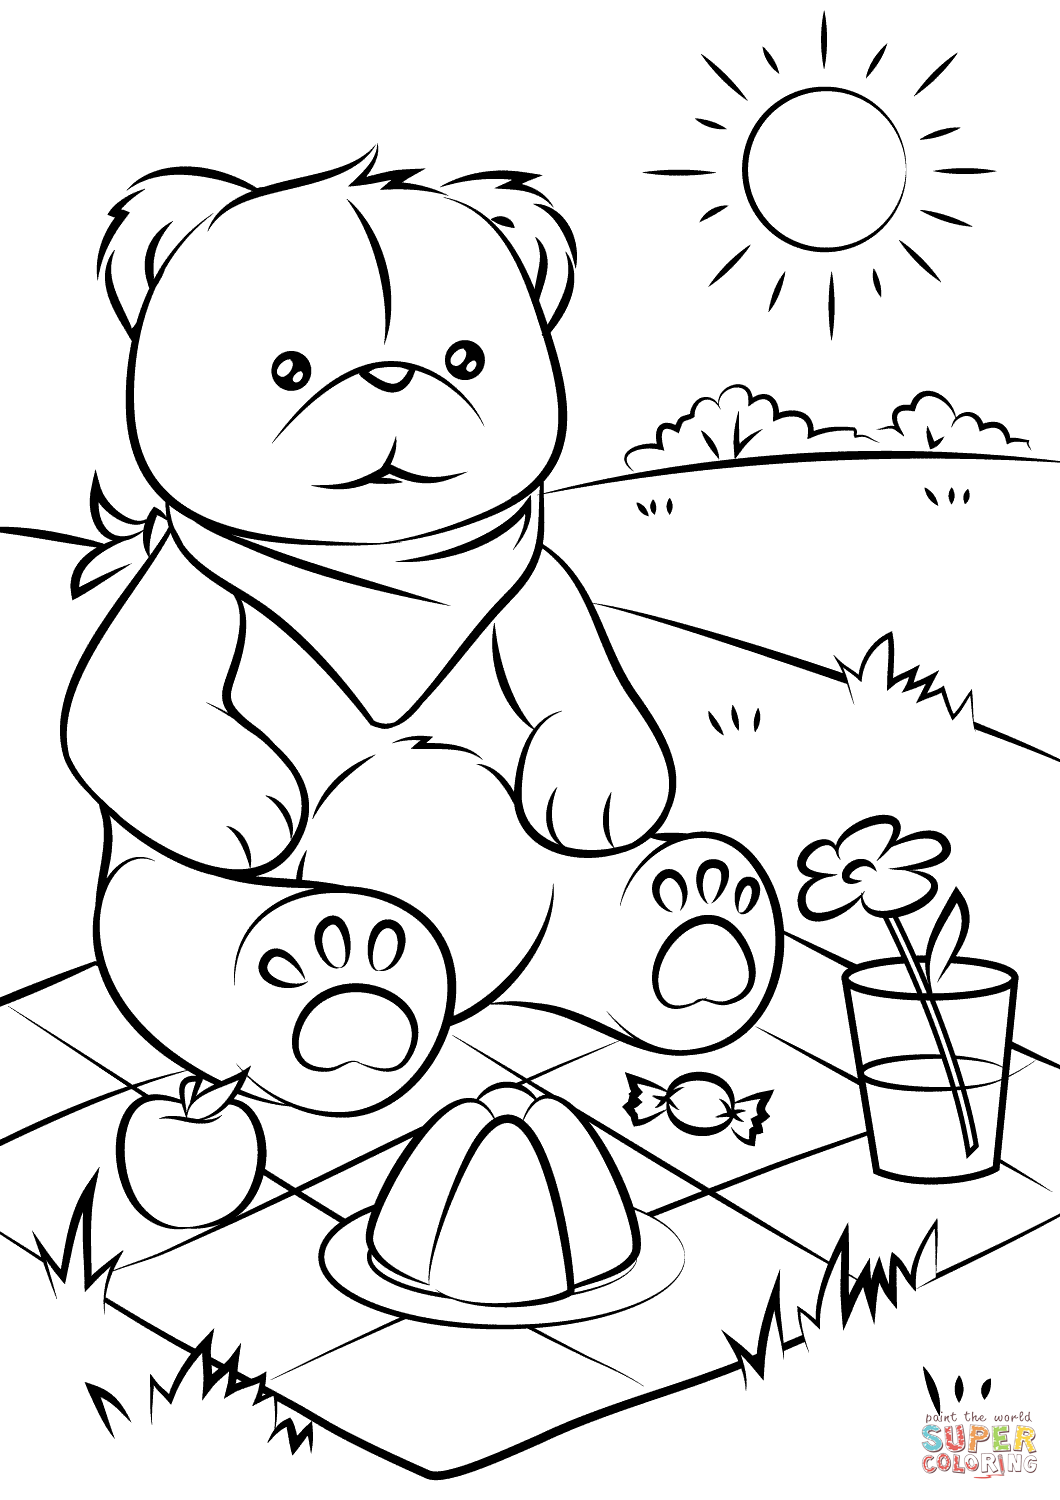 Teddy Bears' Picnic coloring page | Free Printable Coloring Pages